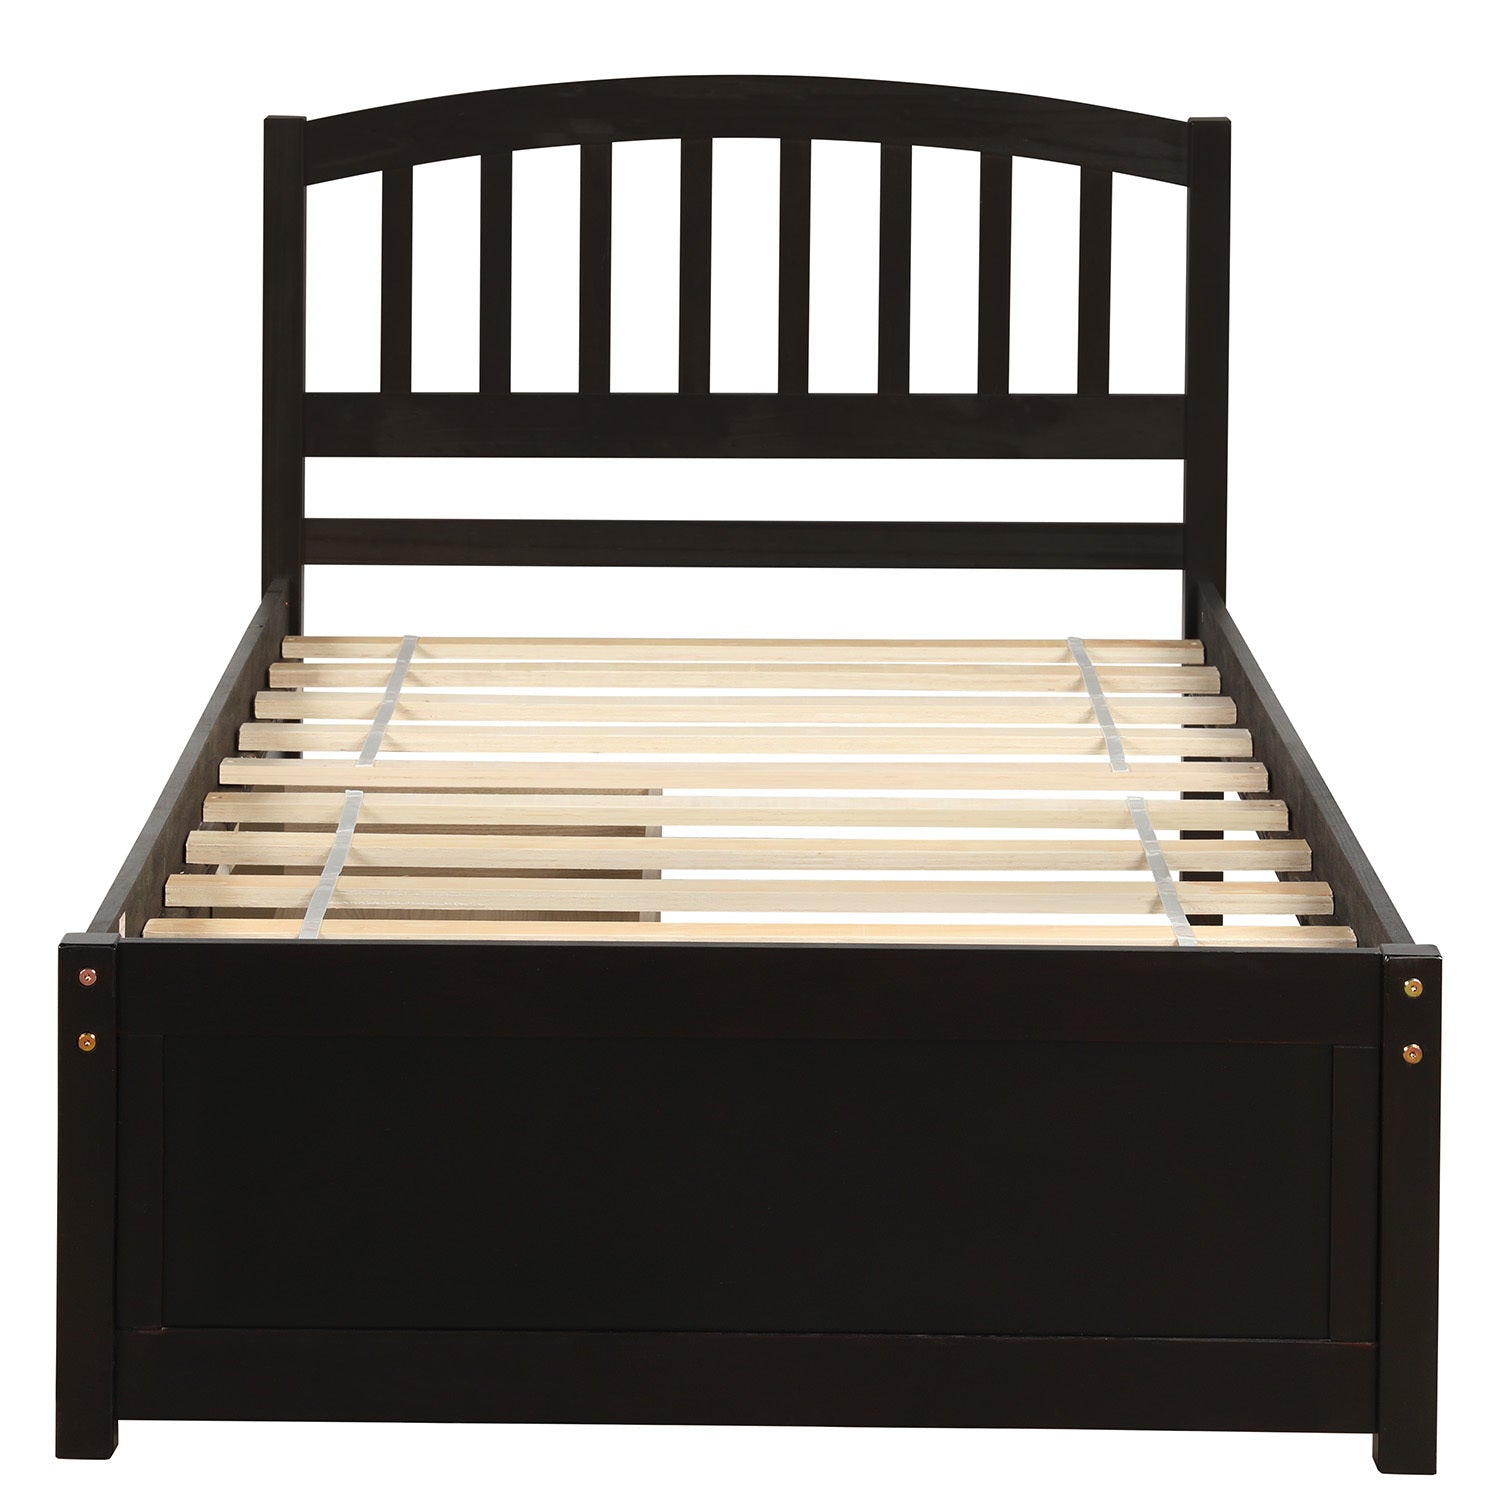 Twin Platform Storage Bed with Two Drawers and Headboard | Espresso Finish | Space-Saving Solution